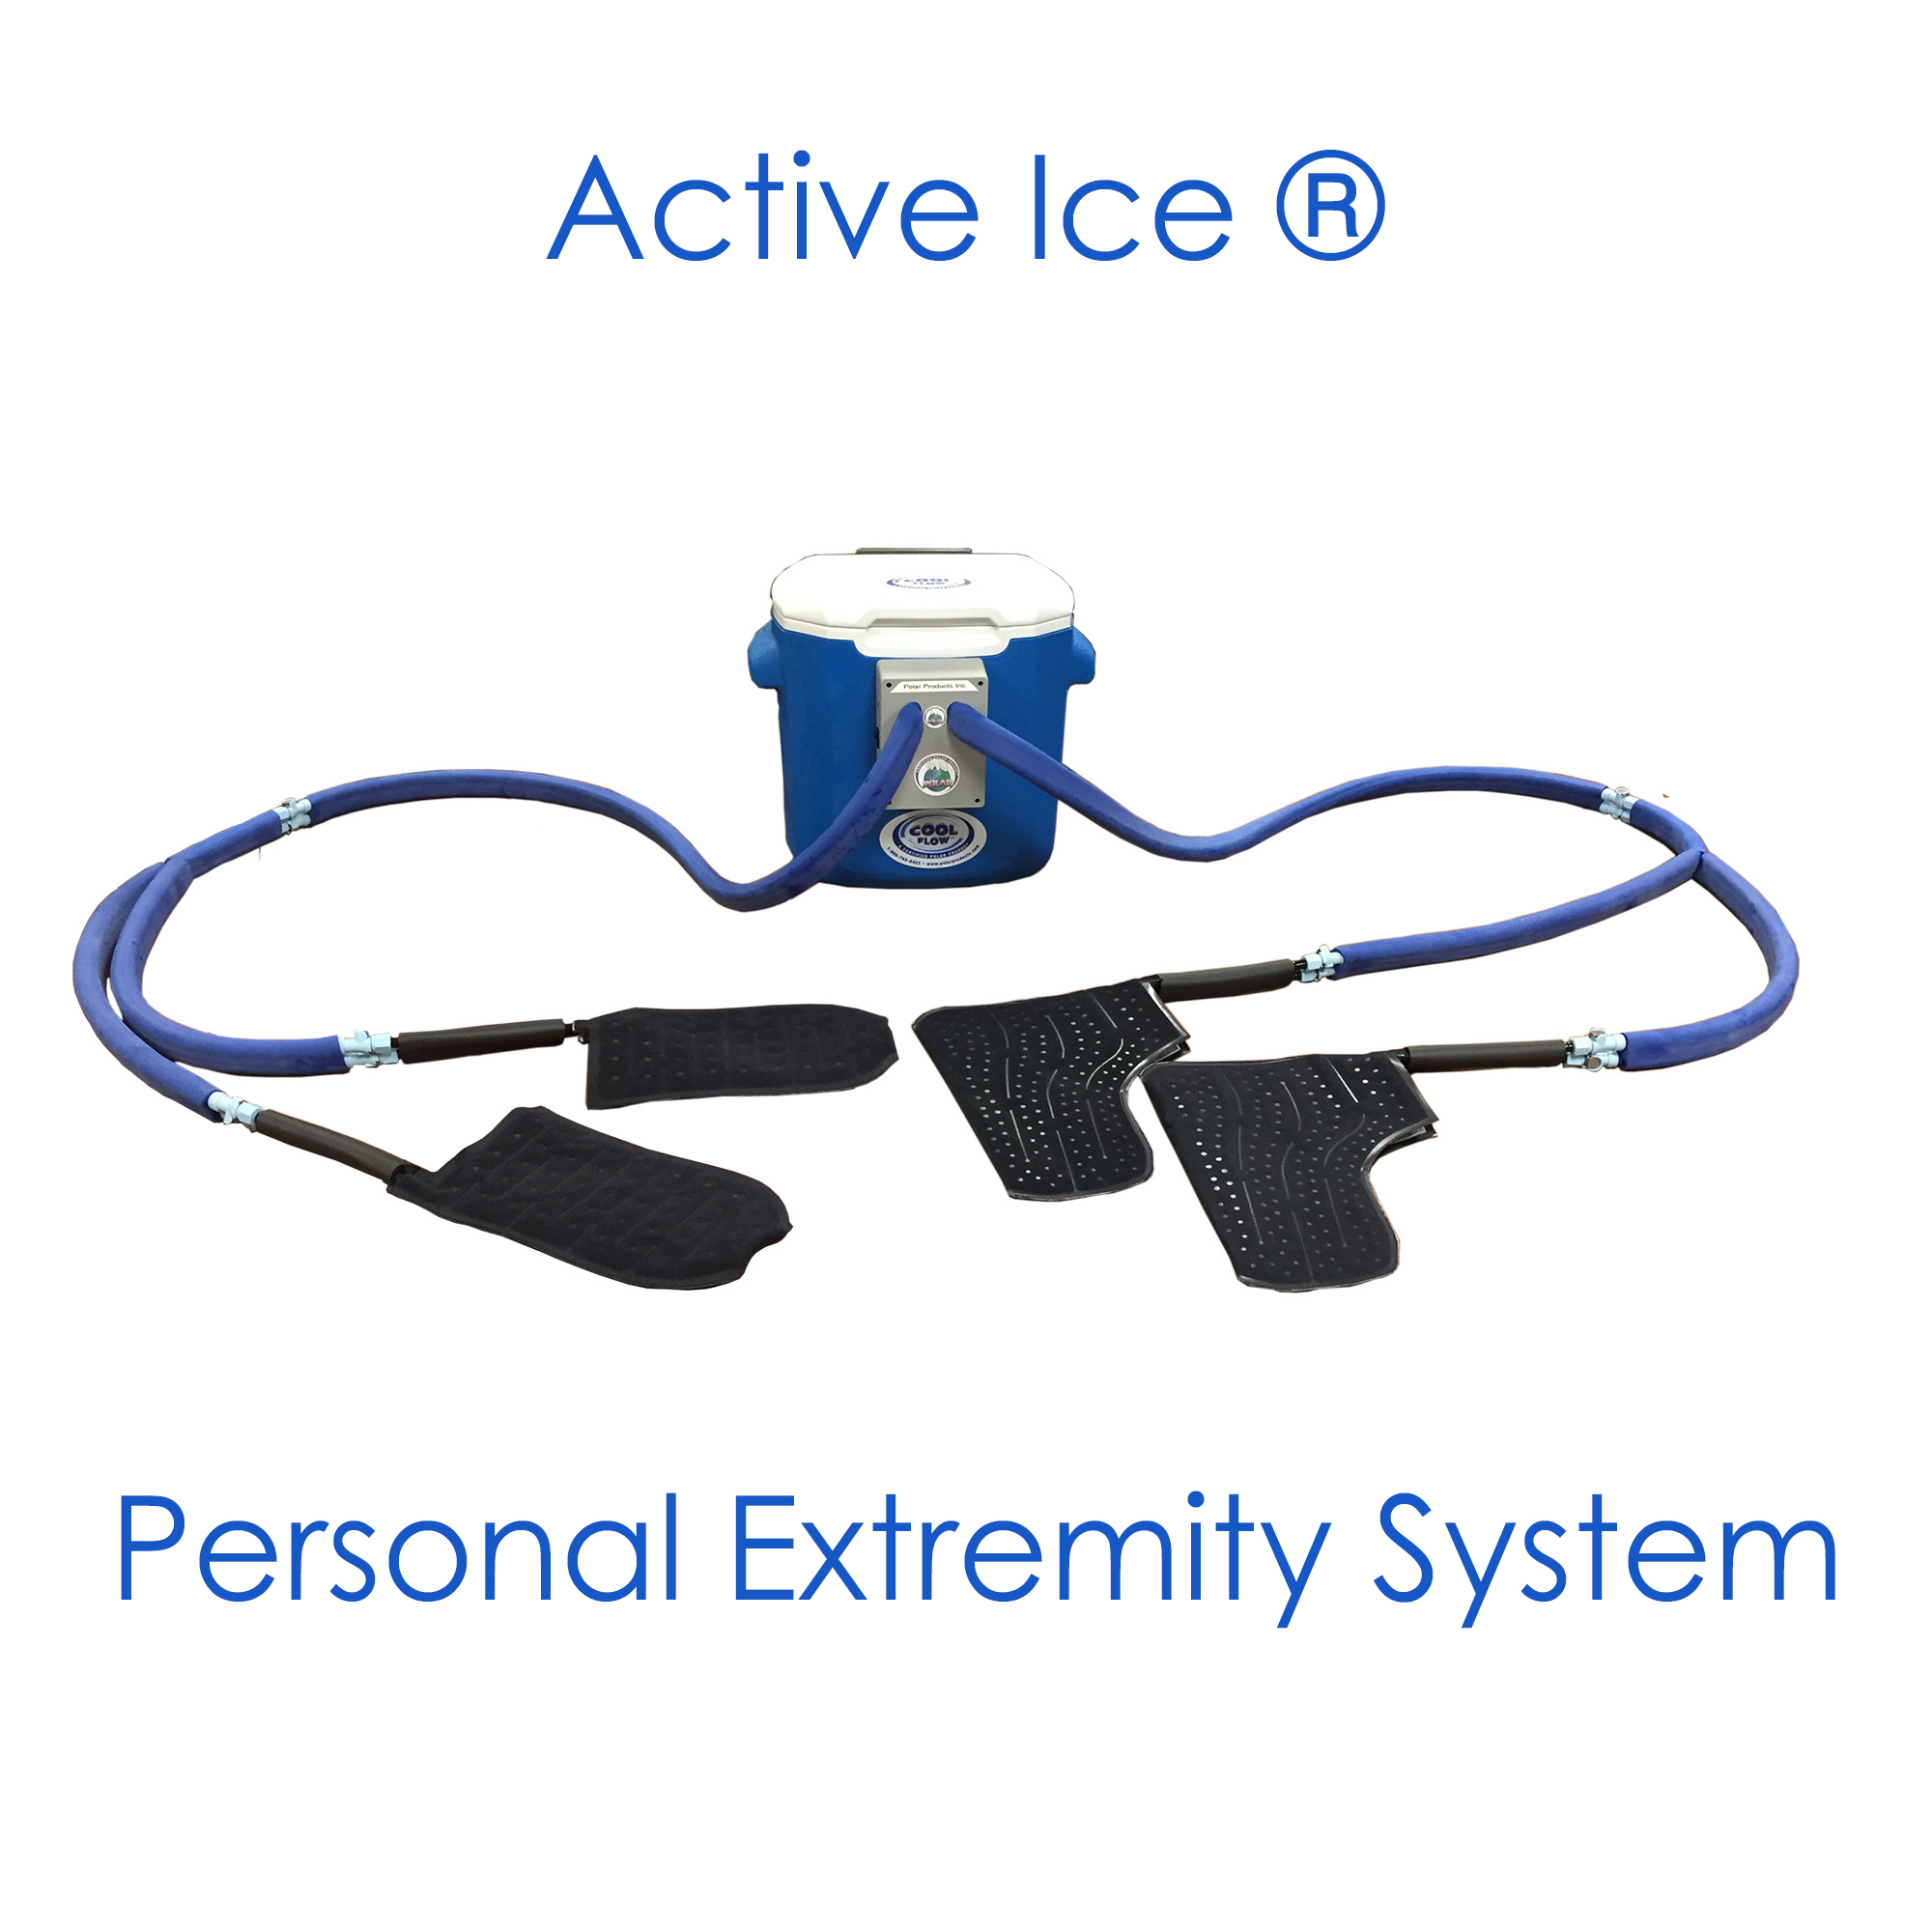 At home and personal extremity water circulating ice machine for the hands and feet